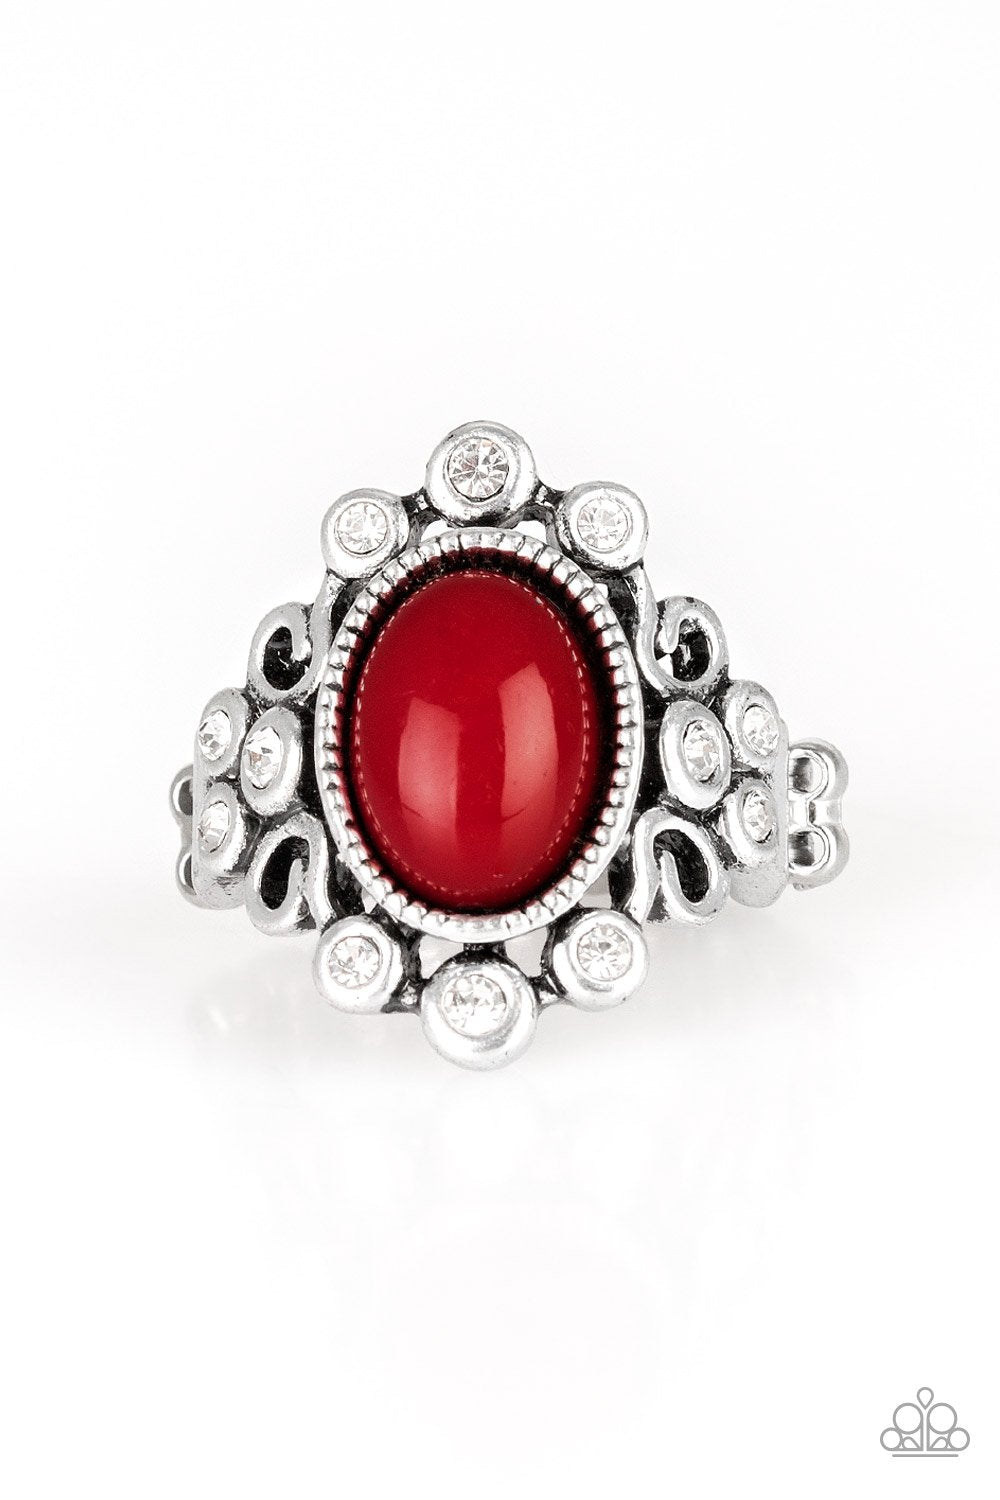 "Noticeably Notable" - Red #3027 - Paparazzi Accessories